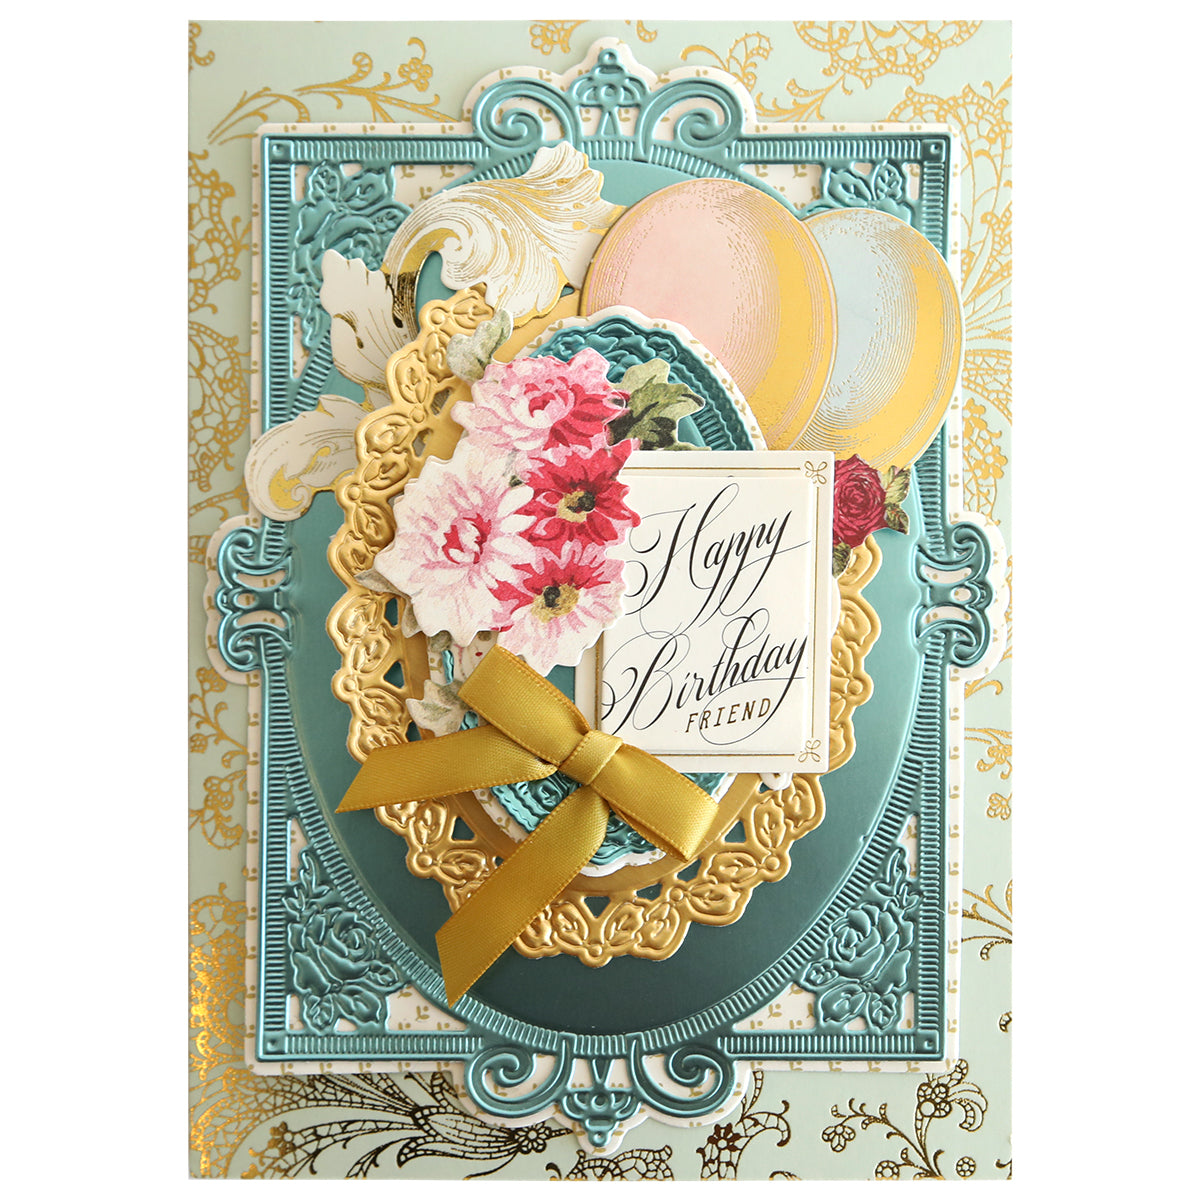 An elaborate birthday card with a "happy birthday friend" message, adorned with floral designs, ornate gold accents, and Swing Out Dies embellishments.